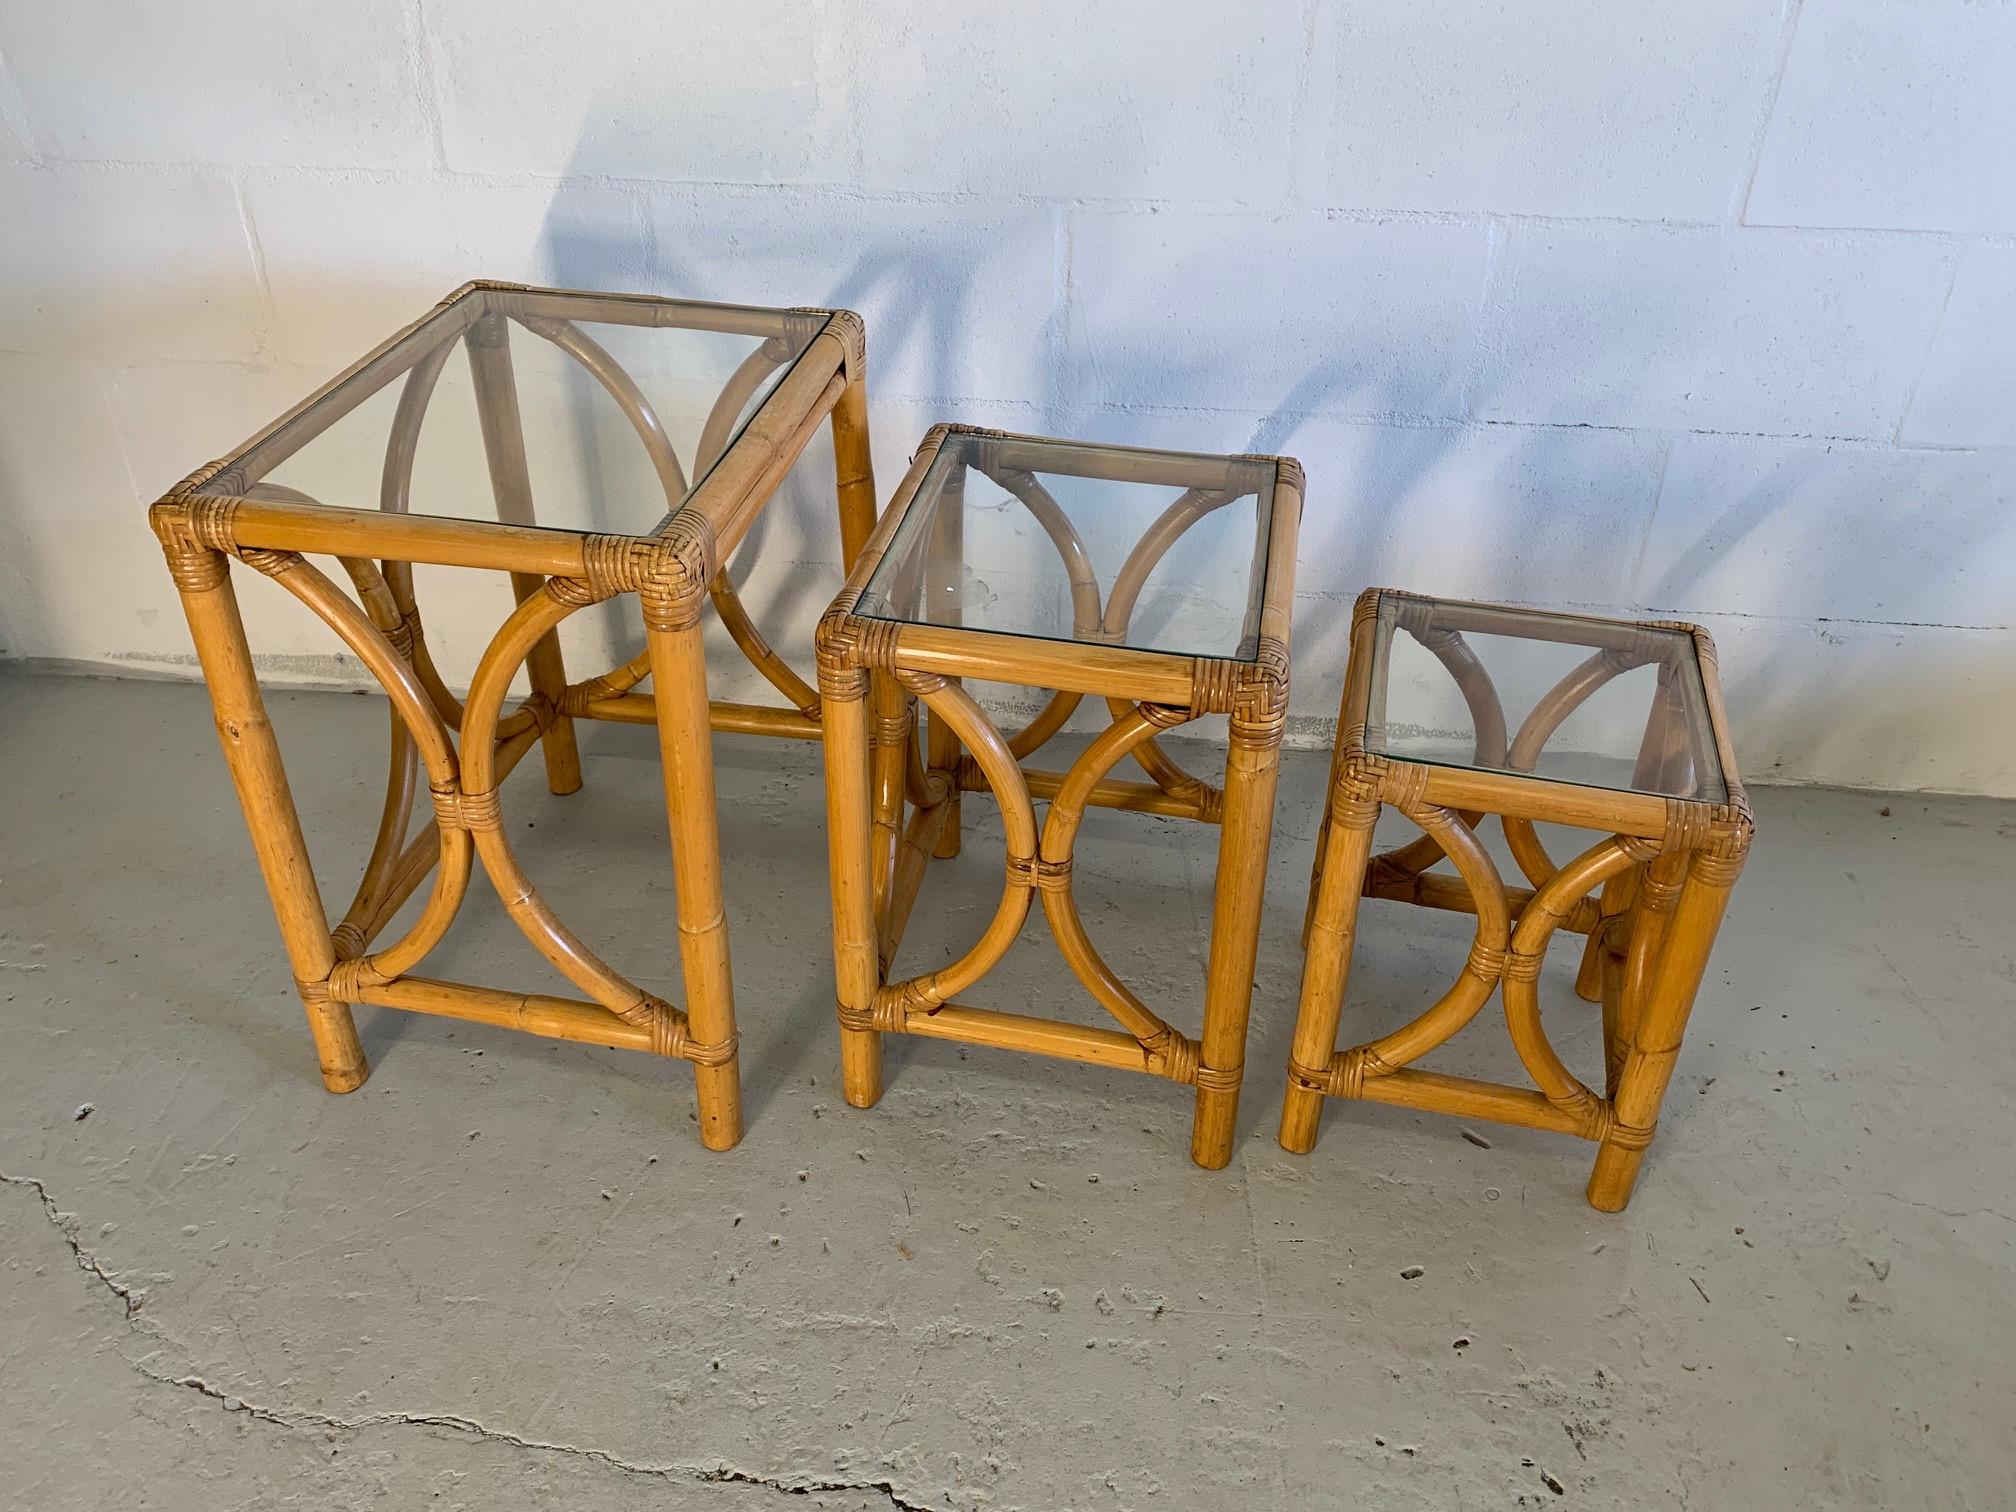 Rattan triple nesting tables feature bentwood rattan in the manner of Paul Frankl. We have two identical sets, price is per set. Glass tops on each table. Very good condition with minor imperfections consistent with age.

NOTE: Only one set of